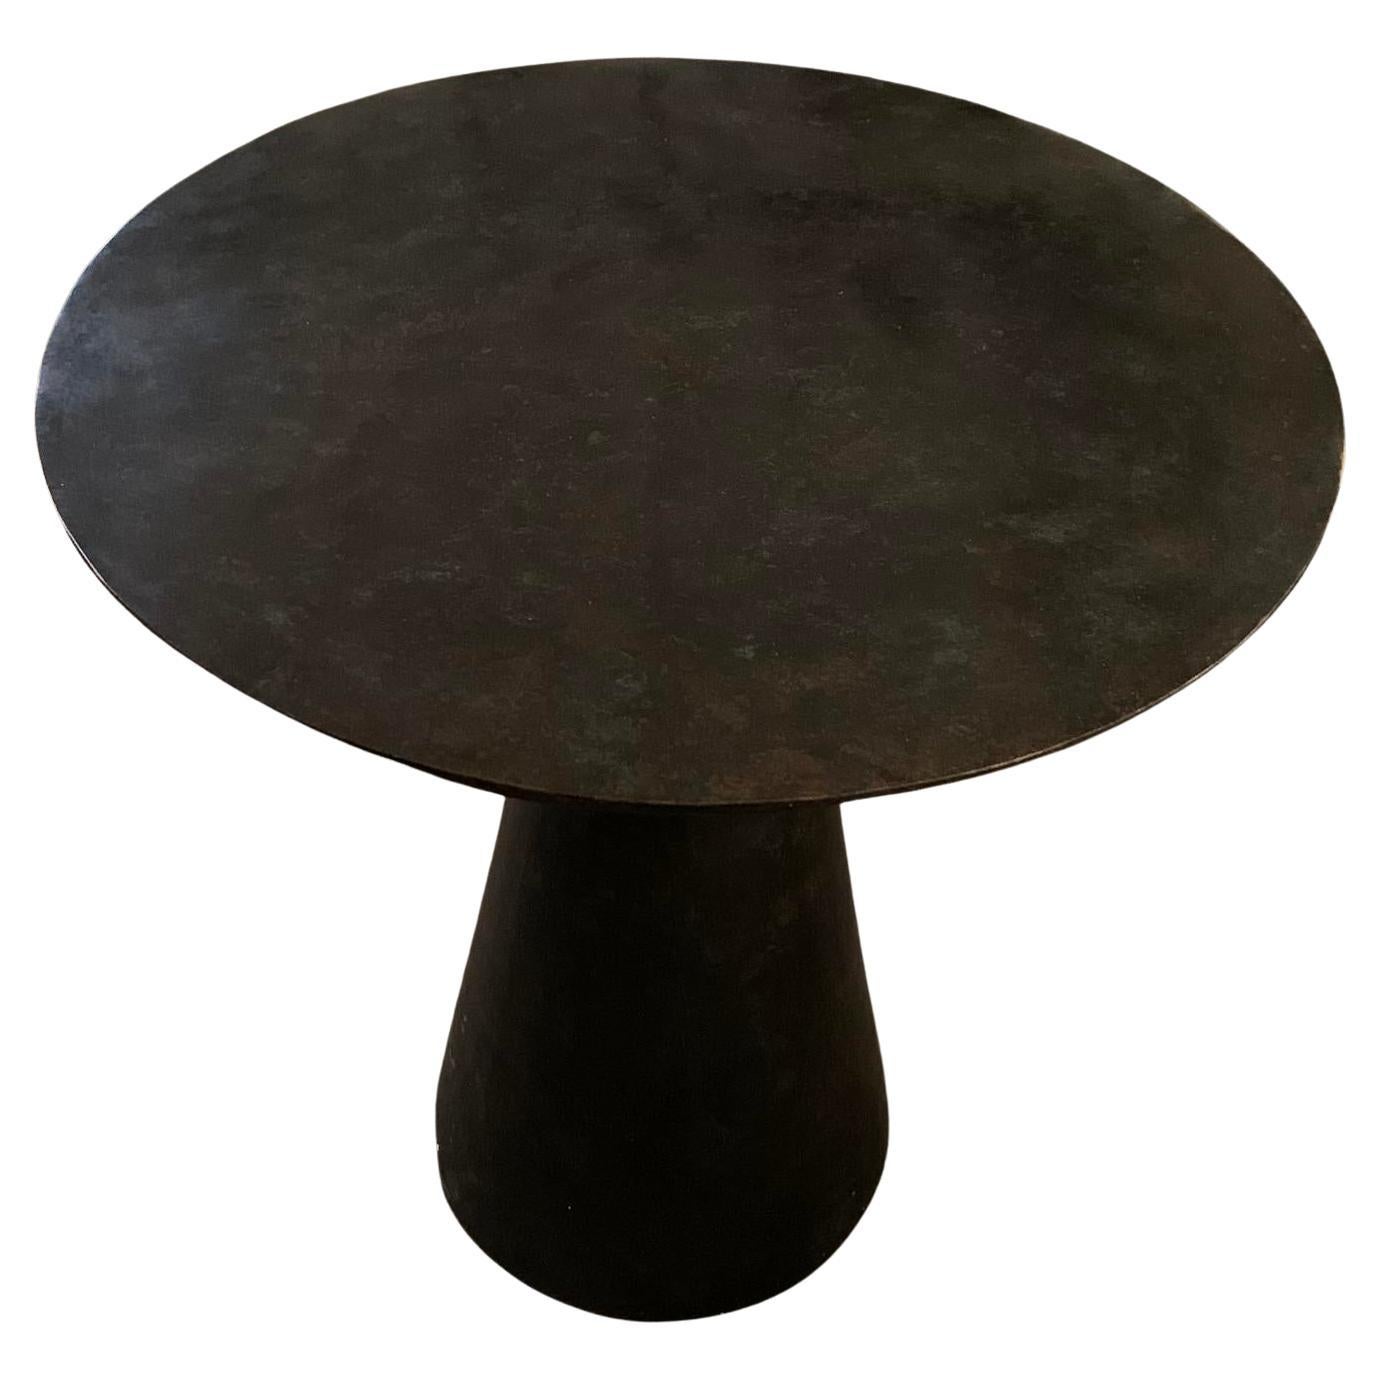 Round bronze side table with smooth top
Bronze tapered cylinder base
Very sturdy and durable.

 